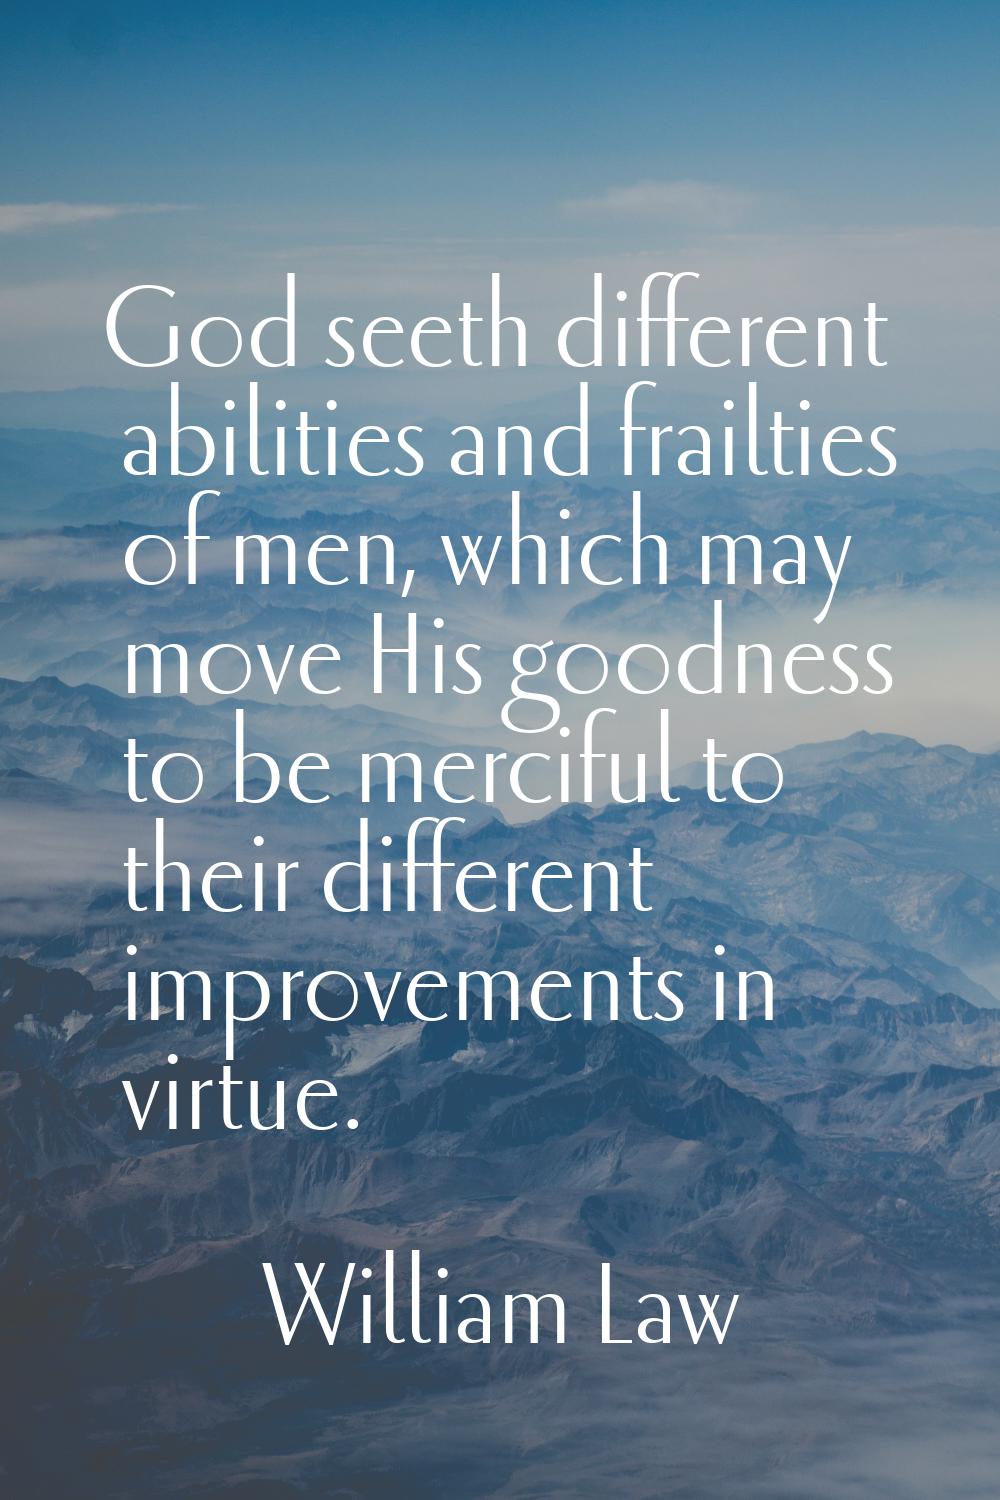 God seeth different abilities and frailties of men, which may move His goodness to be merciful to t